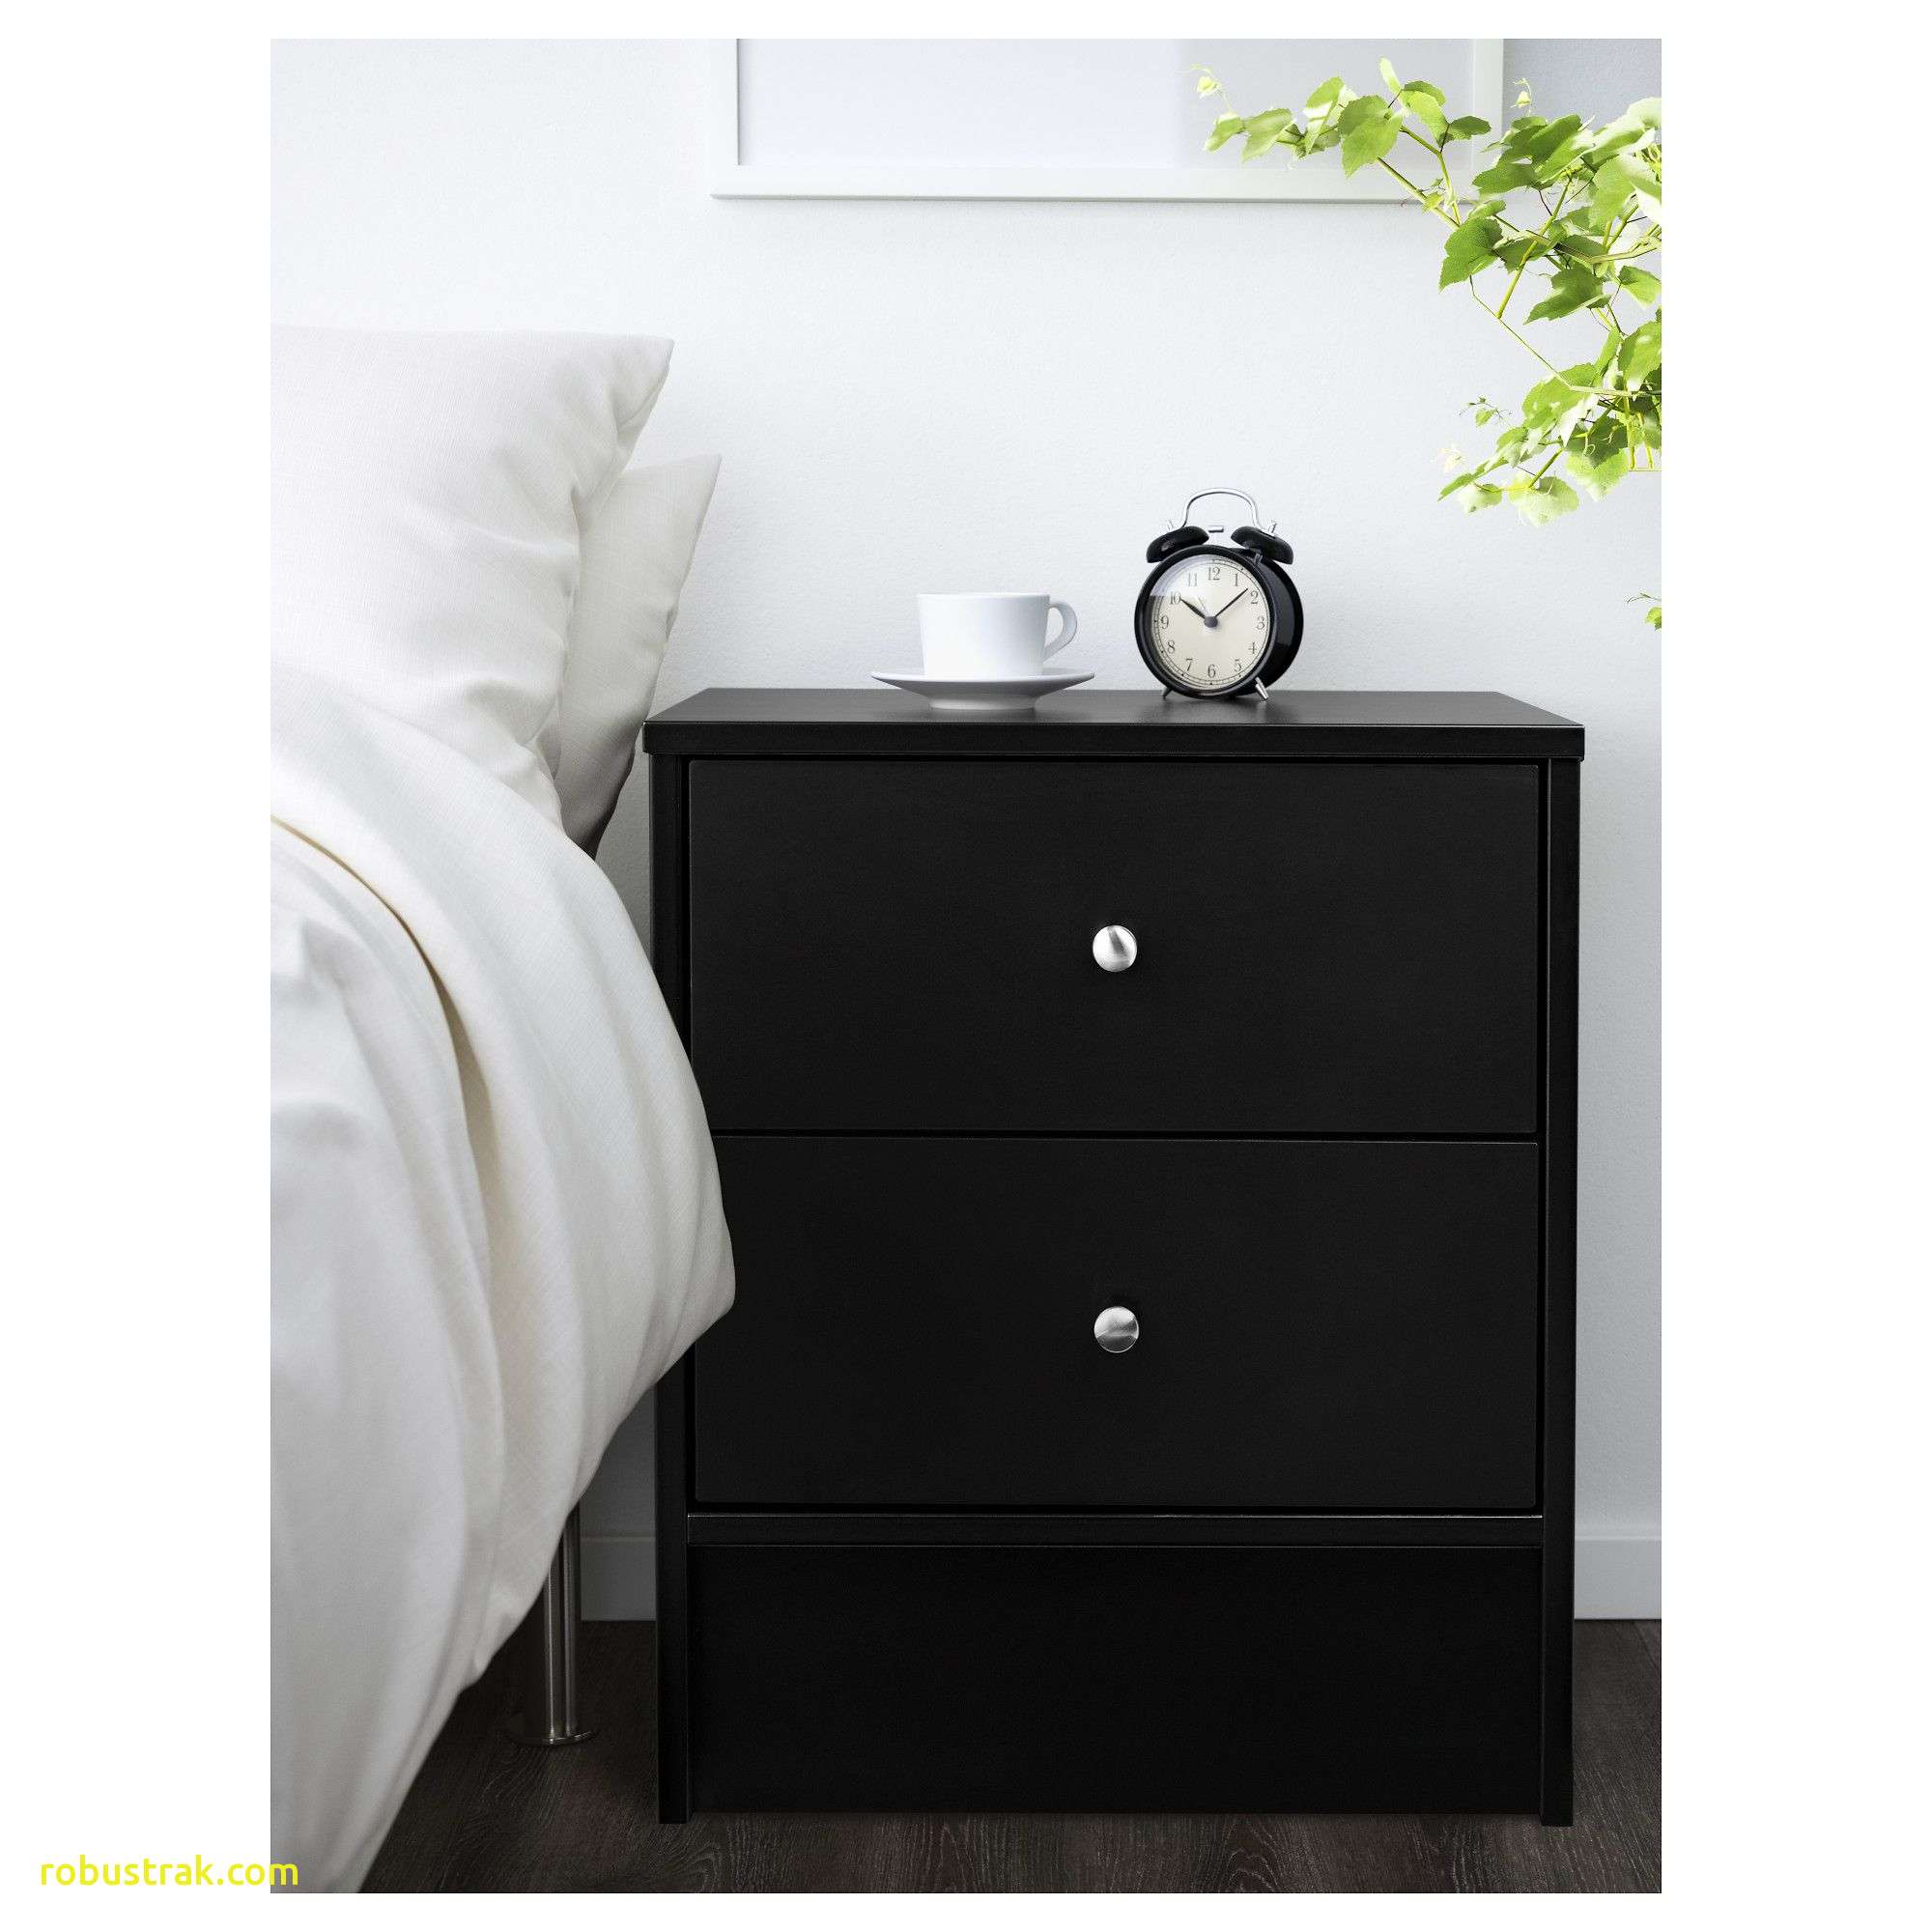 luxury black night stand home design ideas dyfjord nightstand timmy accent table side lamp shades craftsman style lighting next lamps small round end with drawer inch high console